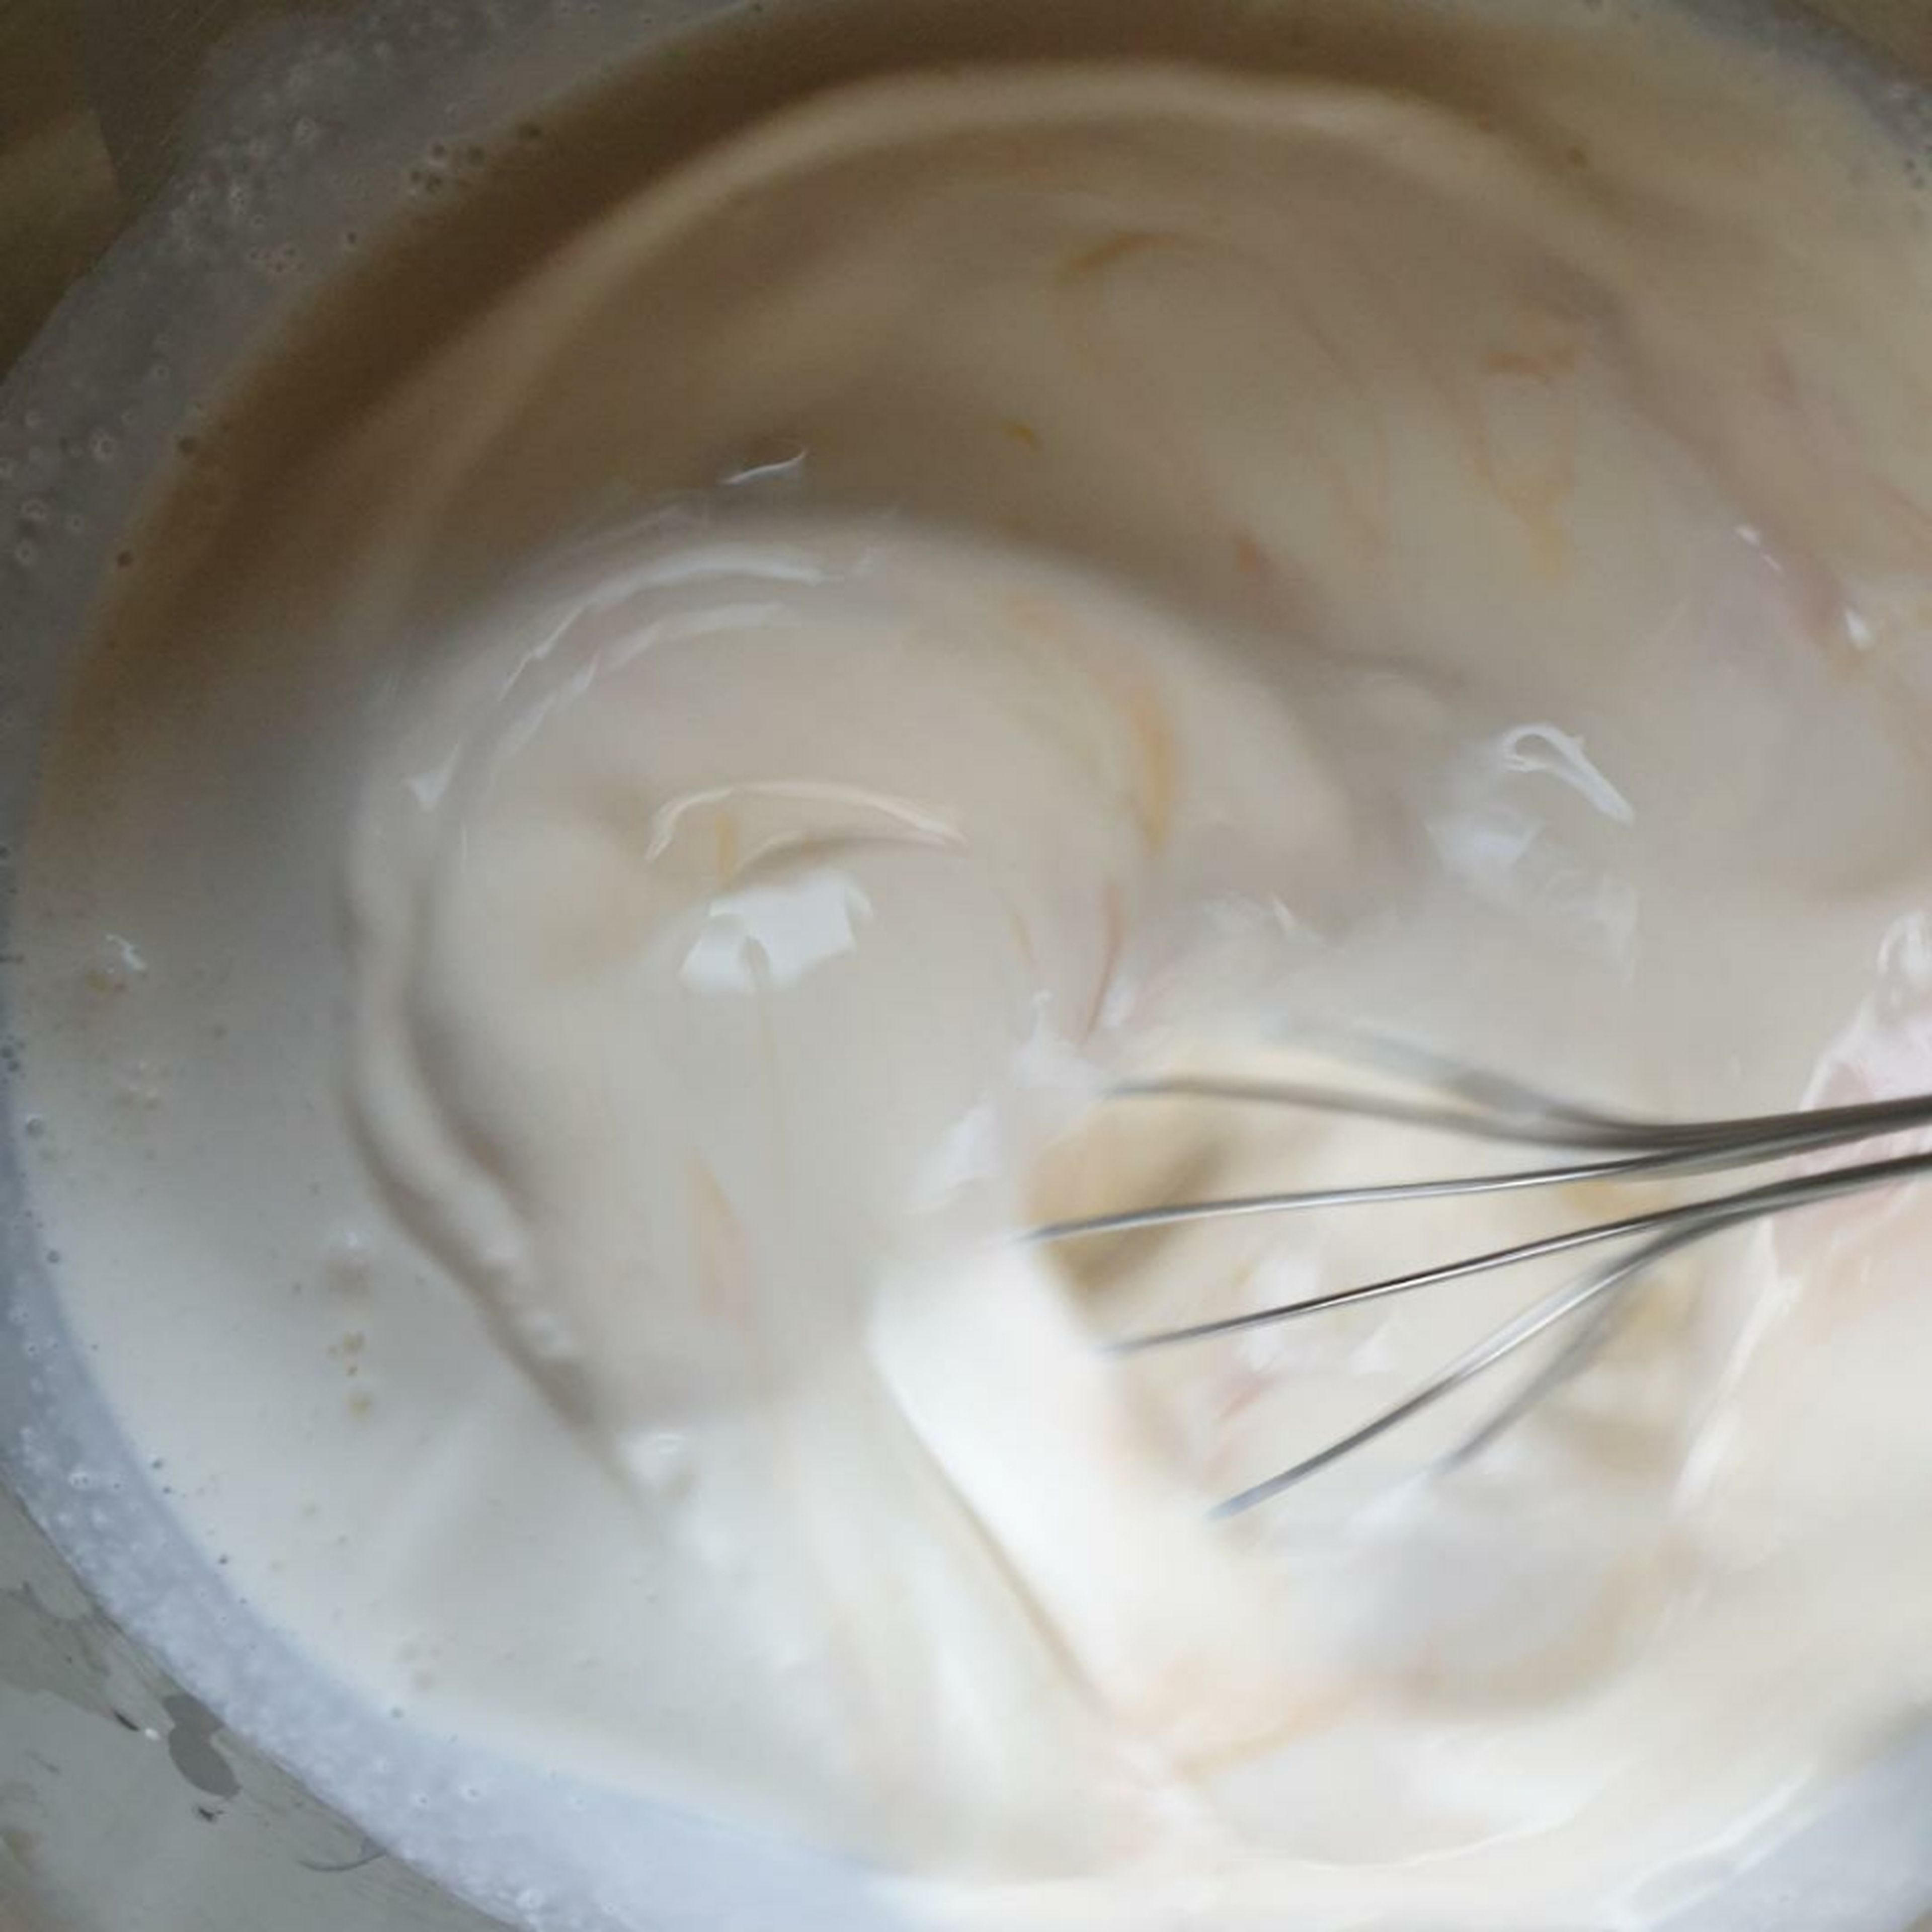 Whisk together the remaining ingredients to make the creme mixture.